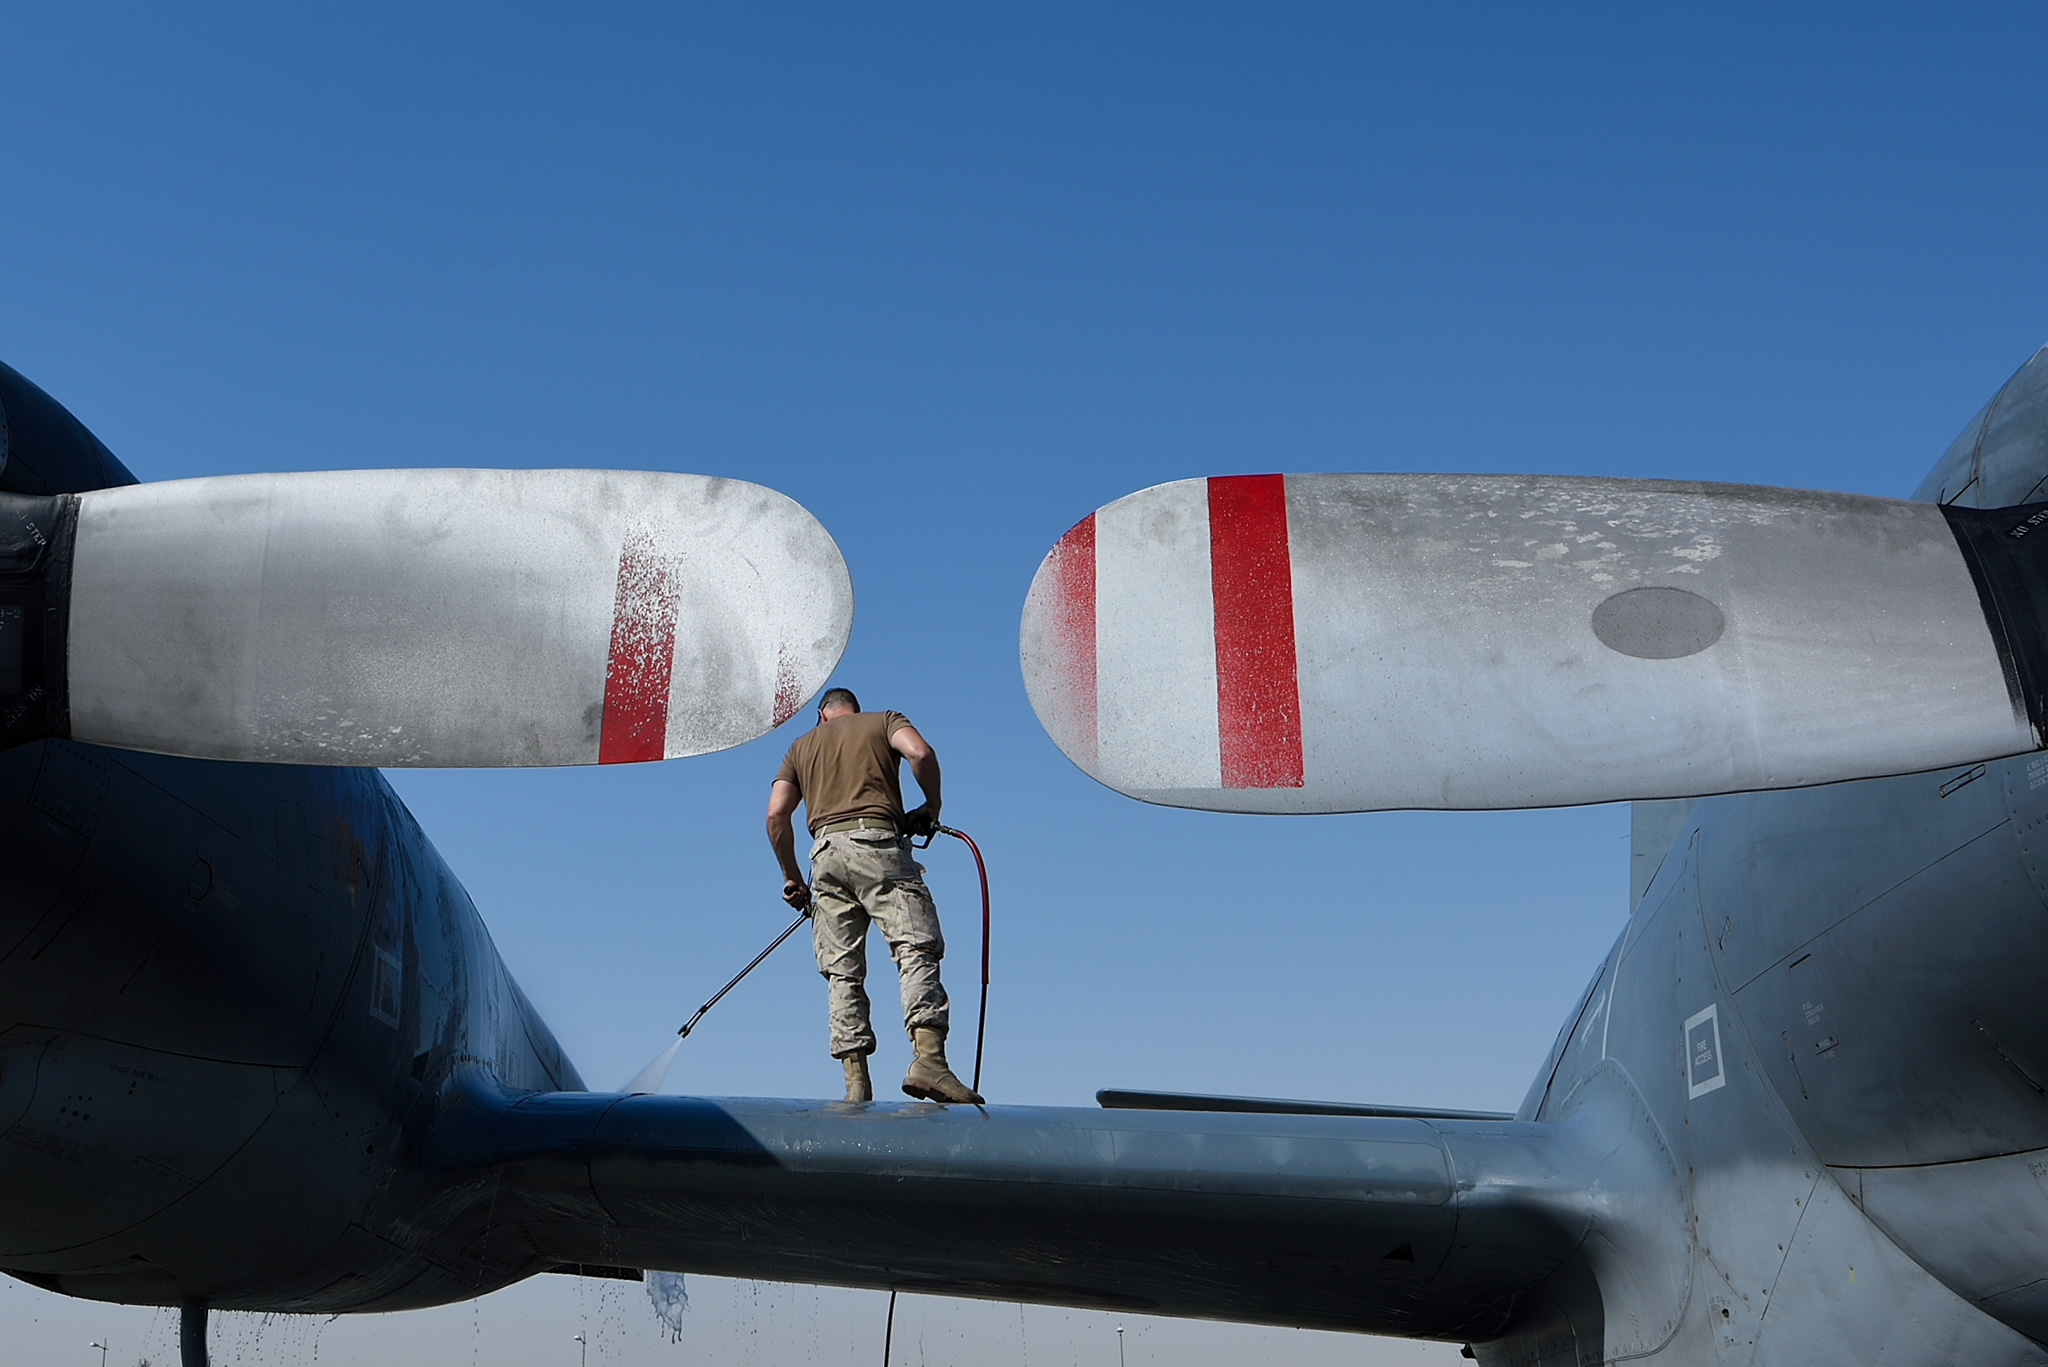 To keep the aircraft functioning properly in a desert environment, an aviation technician sprays down the wing and fuselage of a CP-140 Aurora in Kuwait during Operation IMPACT on April 4, 2016.